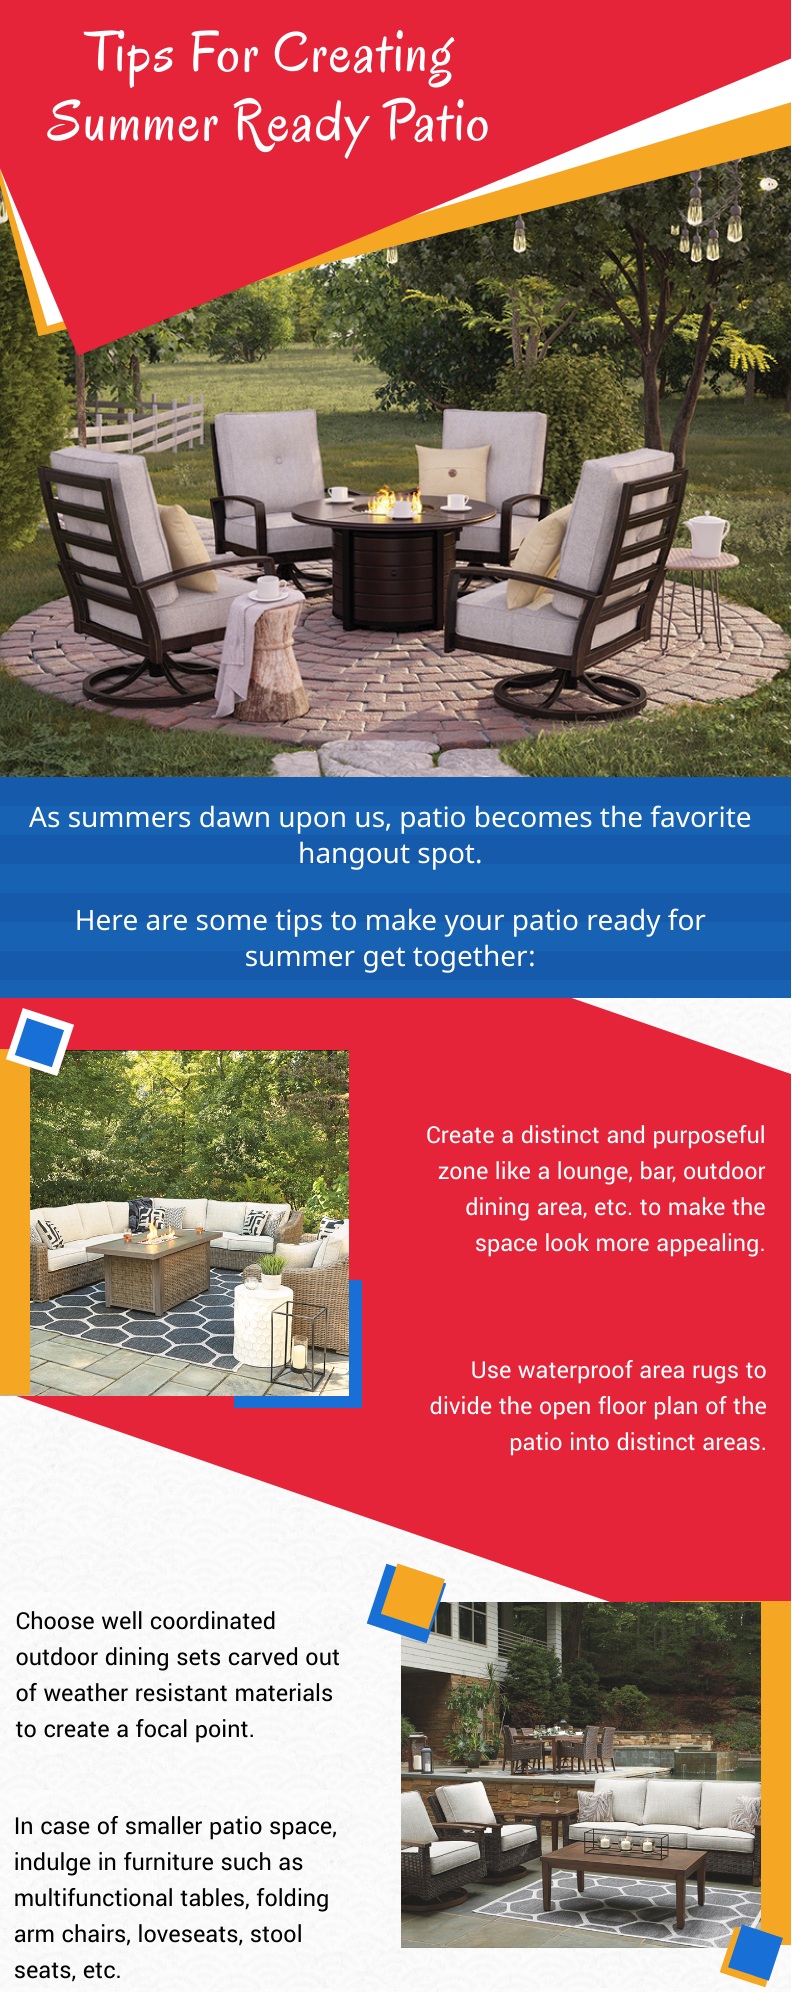 Tips For Creating Summer Ready Patio Killeenfurniture